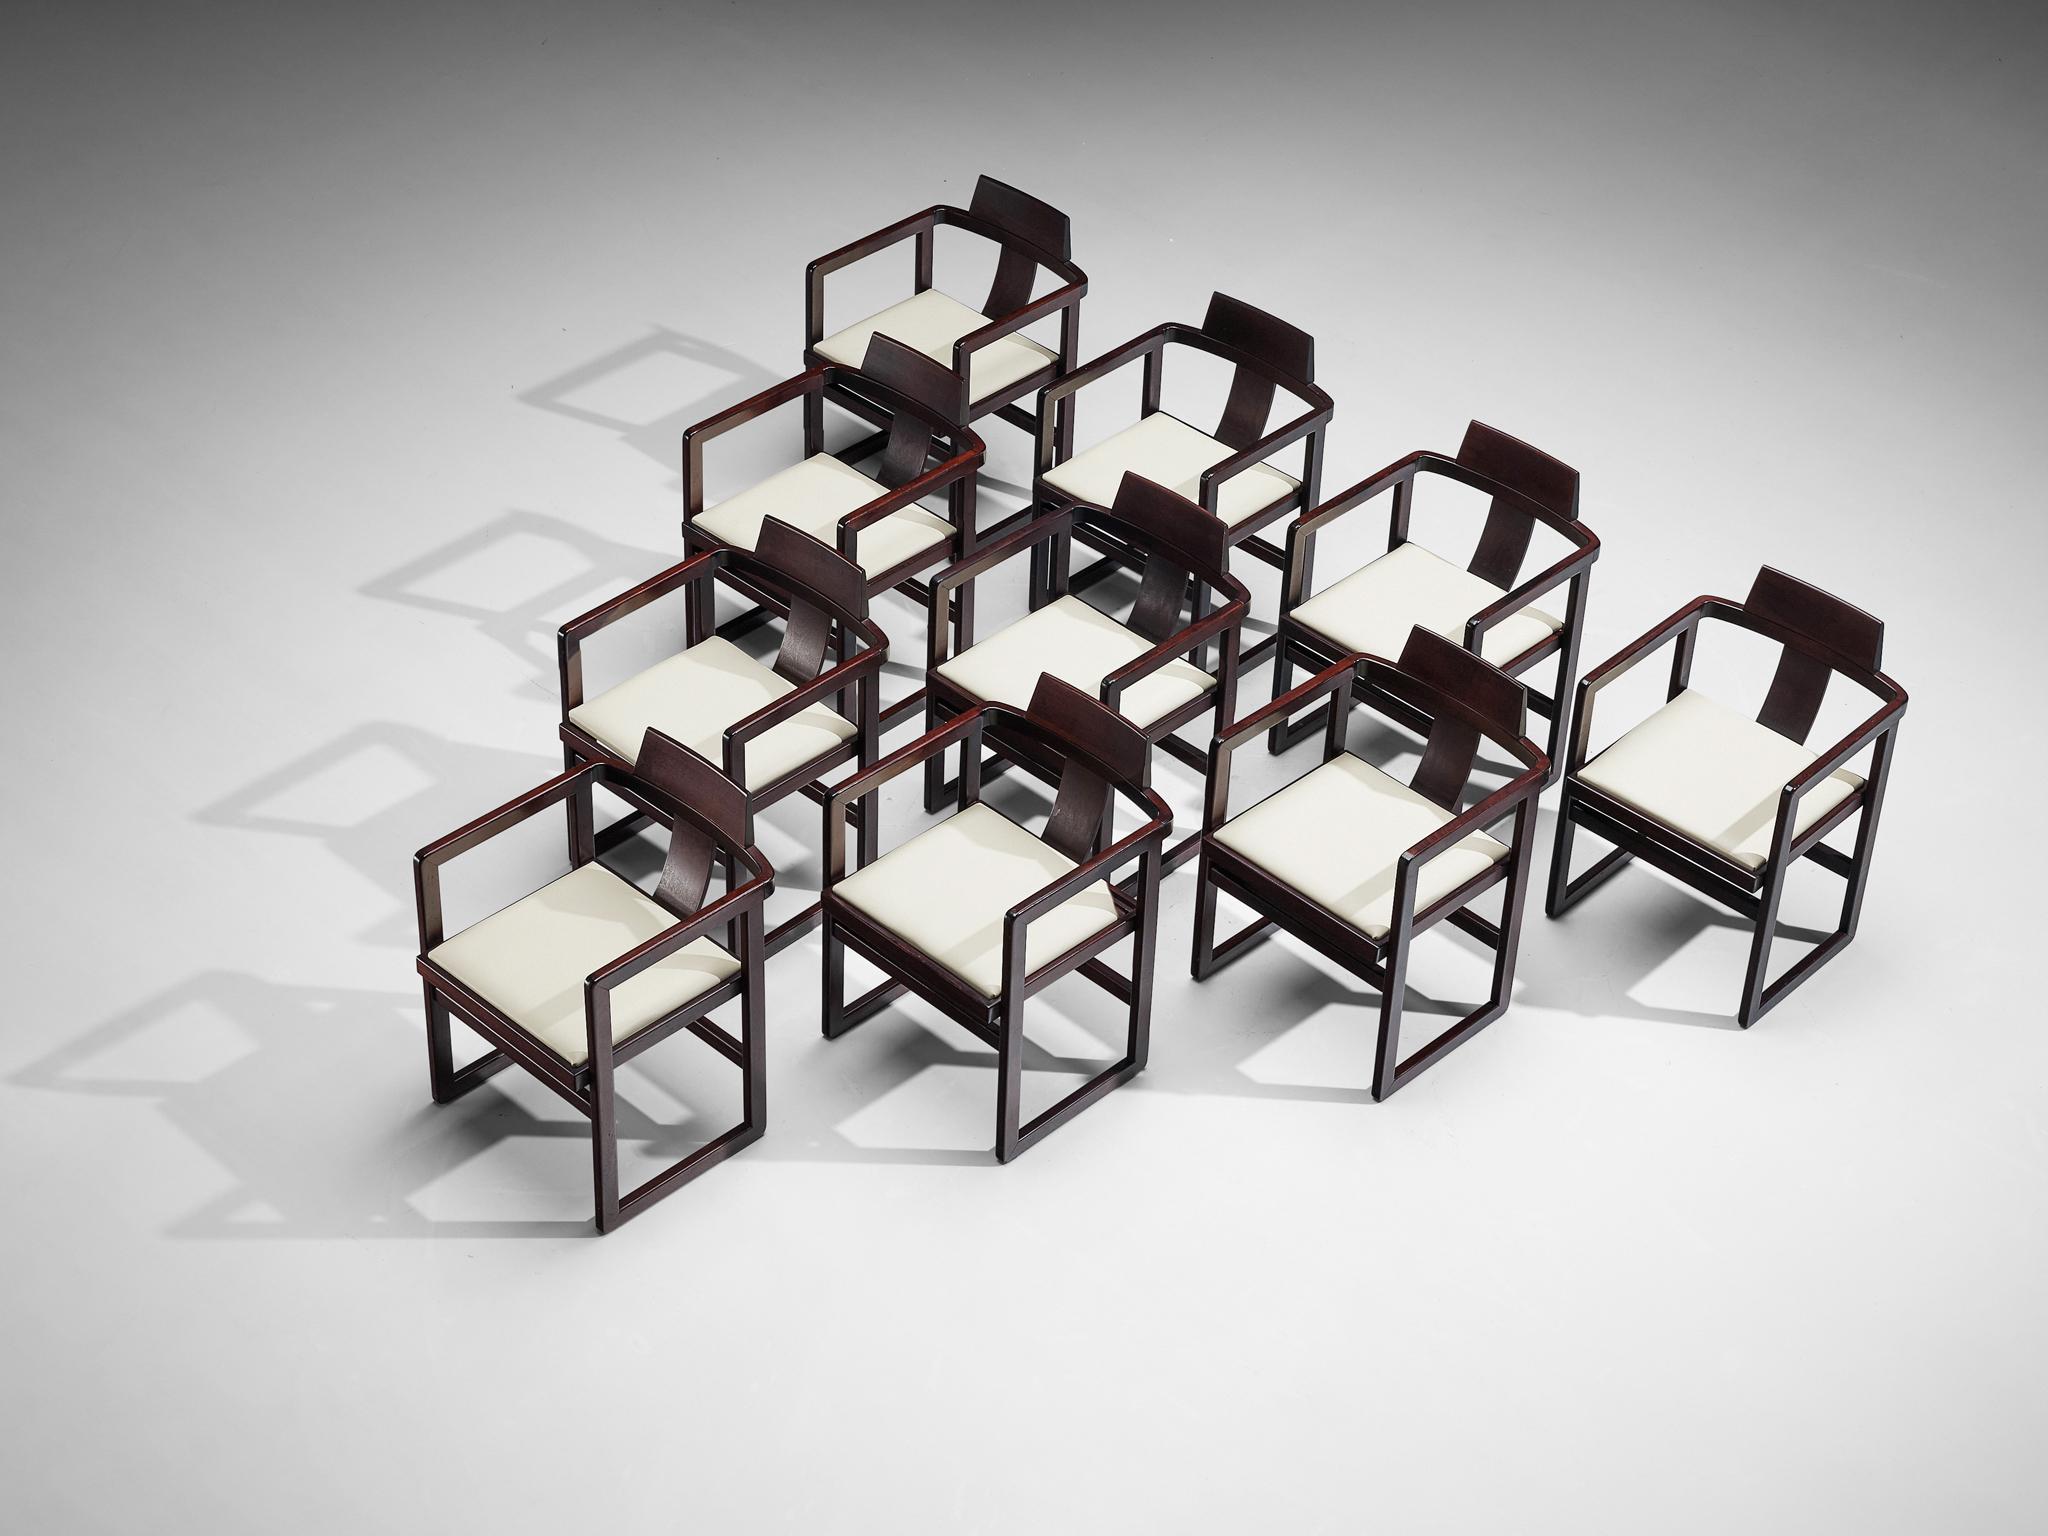 Set of ten armchairs, stained beech, leatherette, Italy, 1970s.

Simplistic yet elegant Italian set of ten dining chairs. Straight geometric lines are prominent in the execution, for example to be seen in its dark stained wooden frame. An elegant